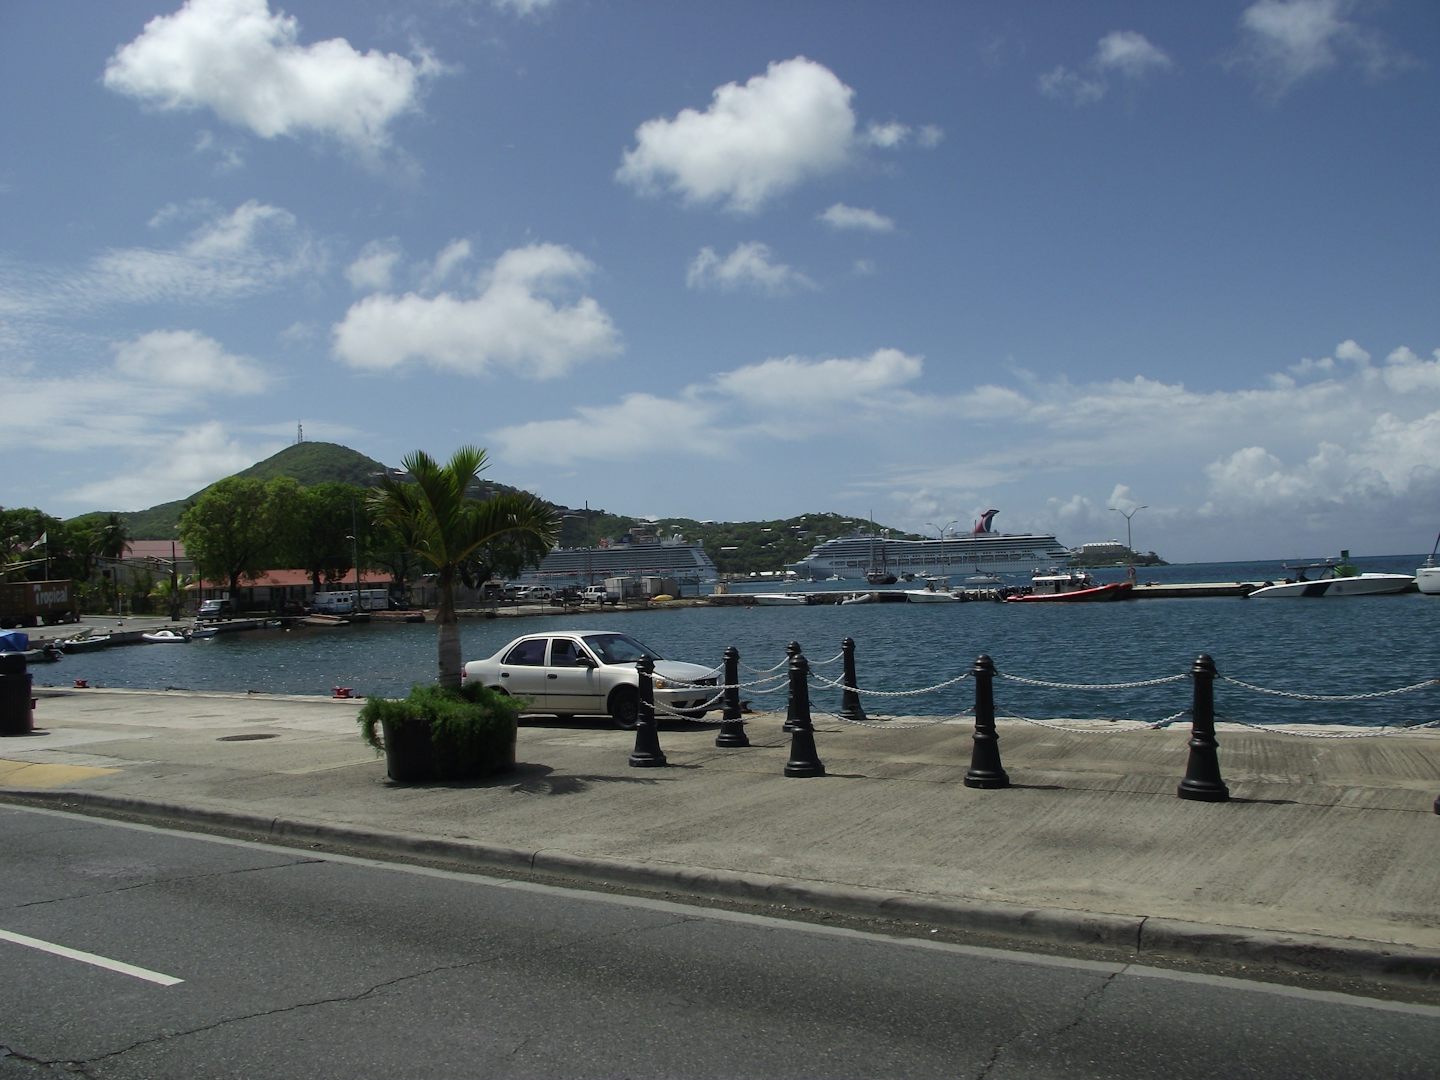 Getaway and Carnival Glory in St Thomas